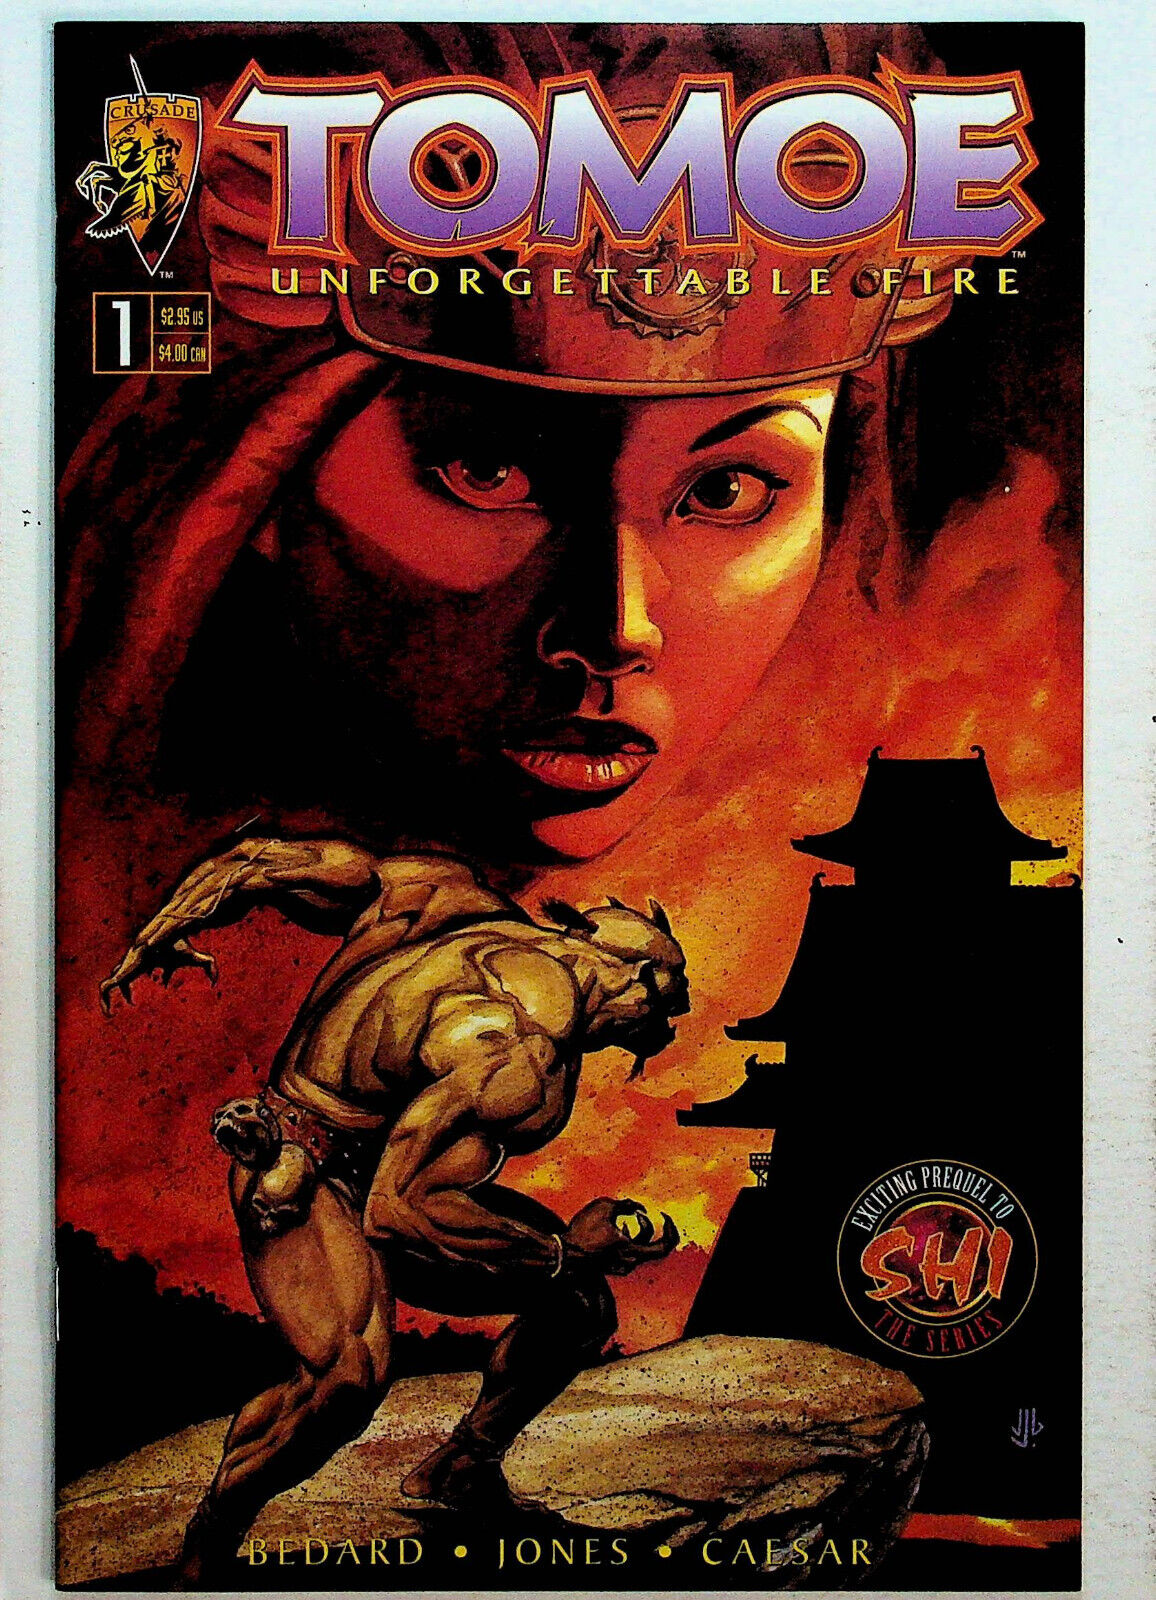 Tomoe Unforgettable Fire #1 - VF/NM Beautiful I combine shipping